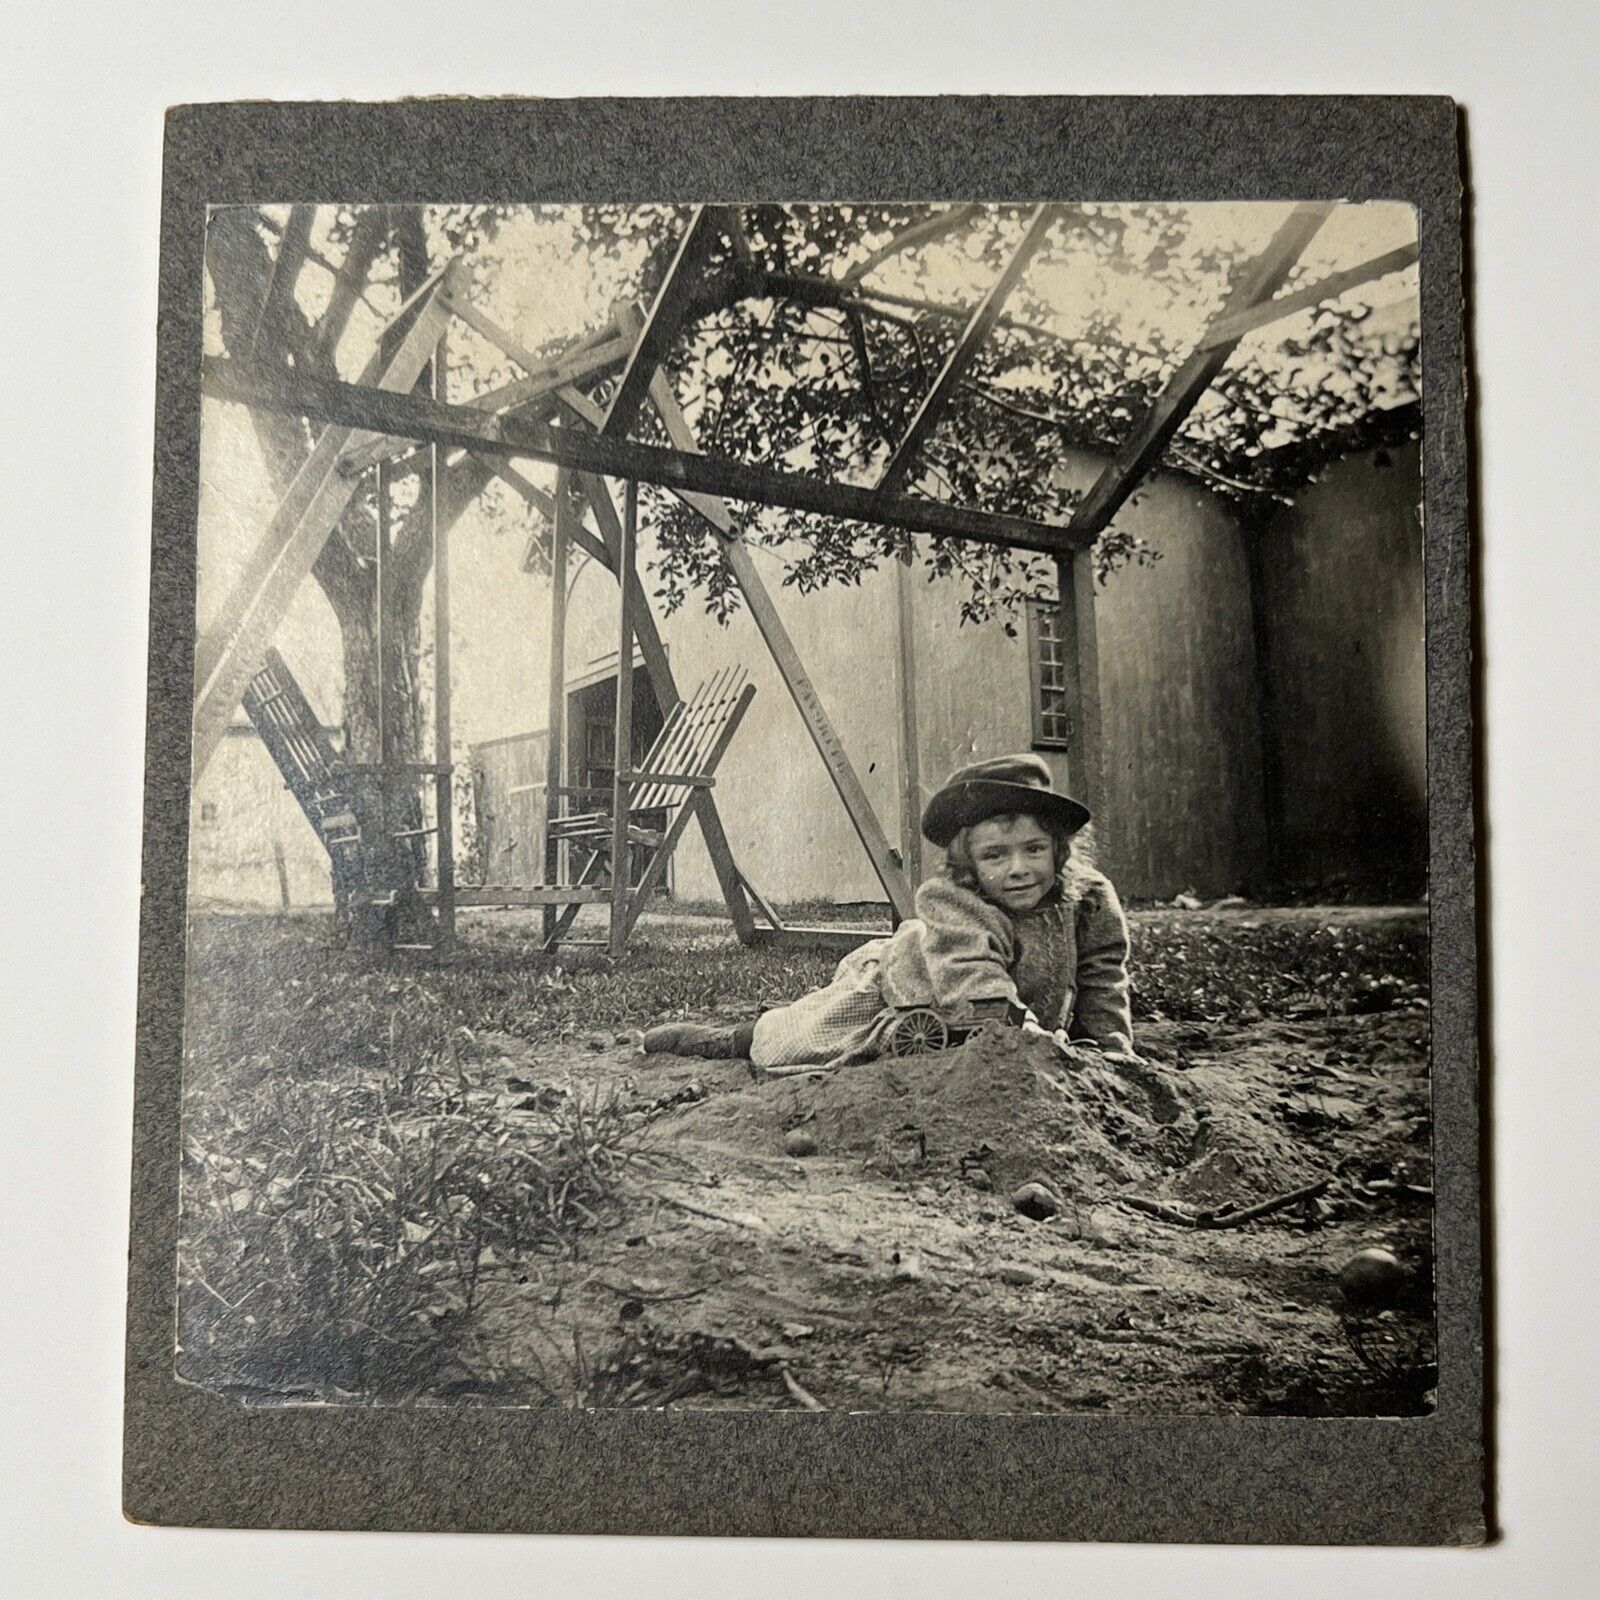 Child Playing in the DIRT by SWING 1890 antique Cabinet Card Photo TRACTOR TOY